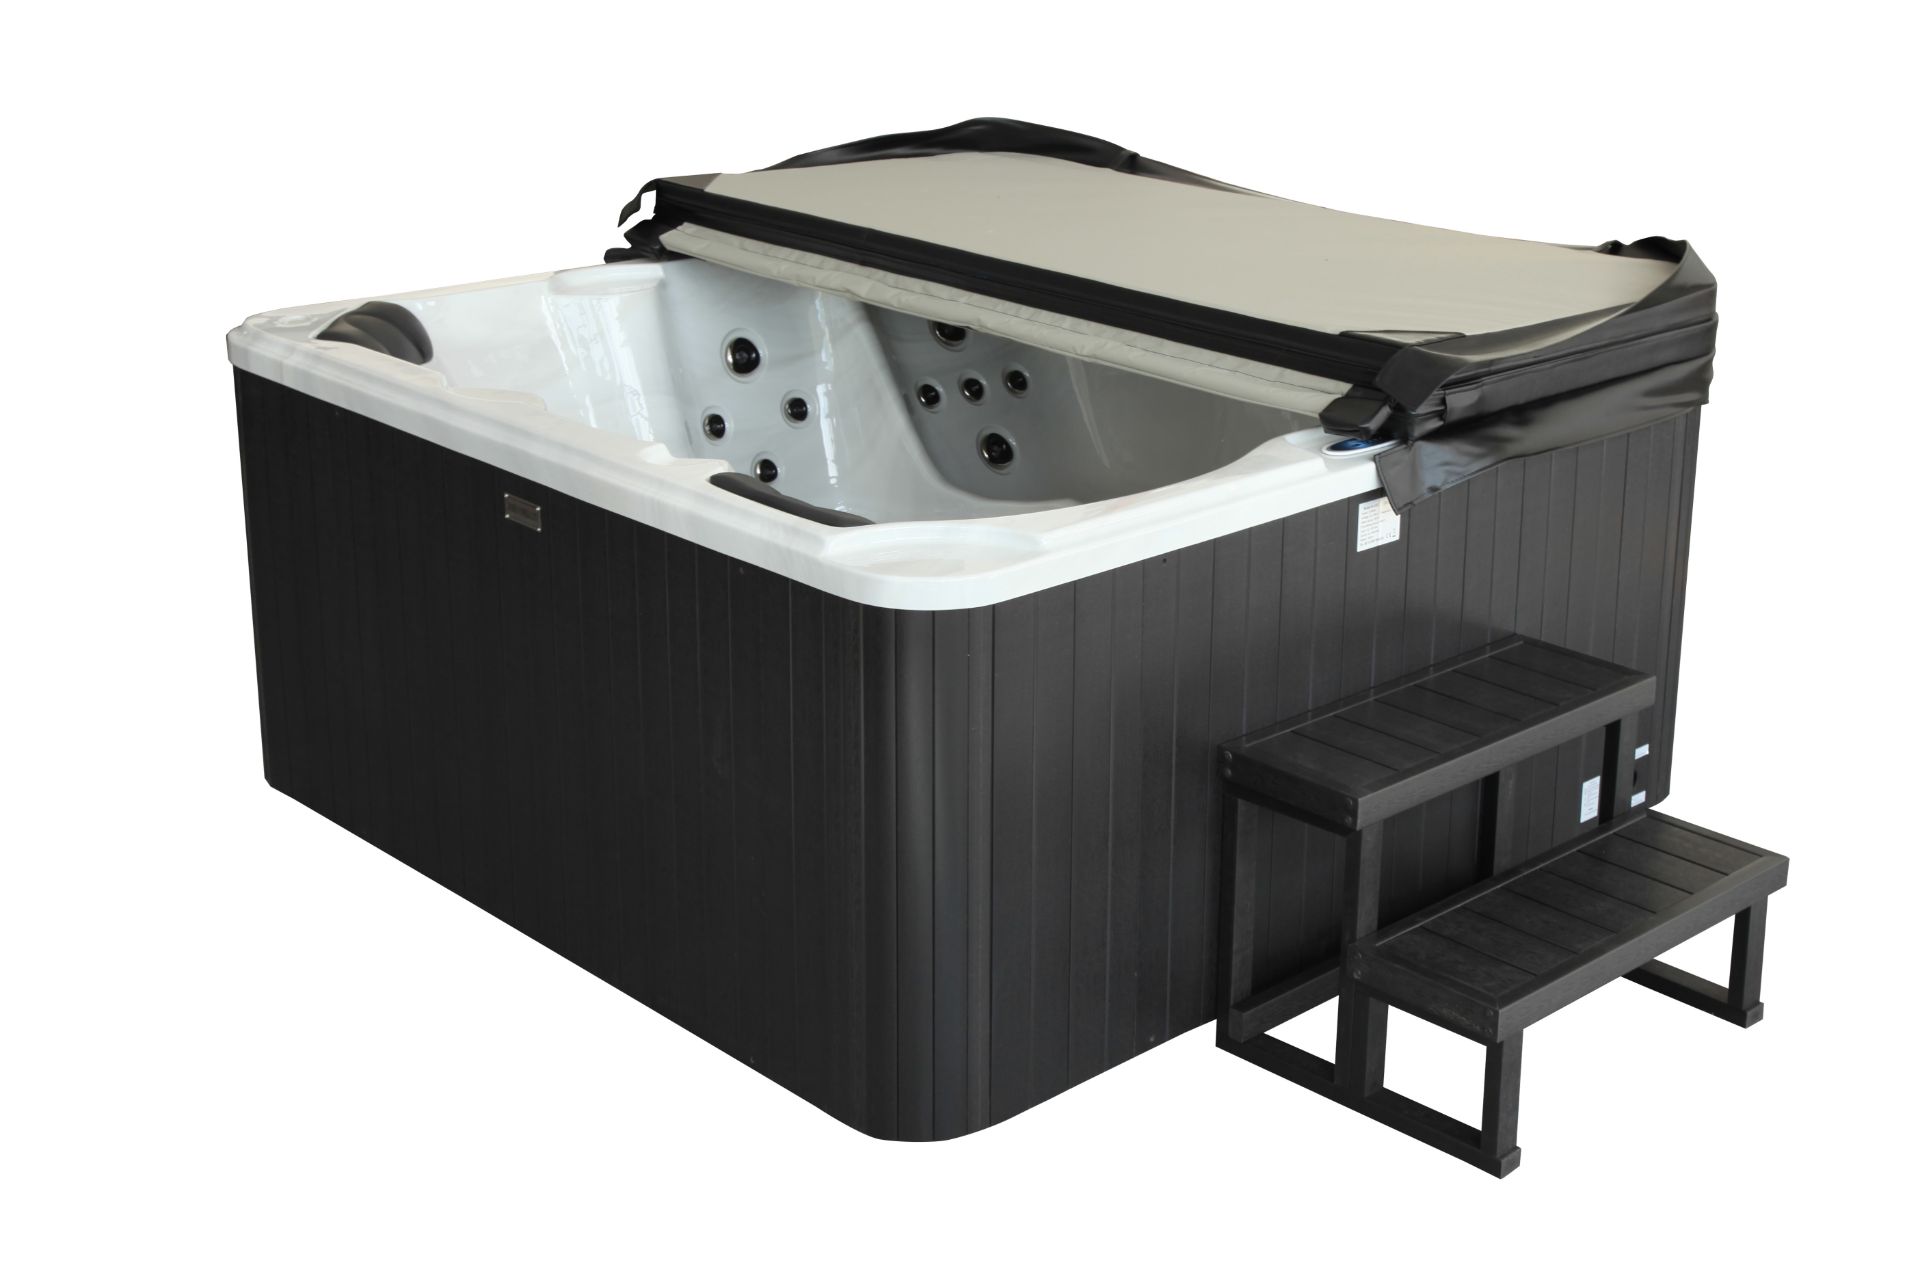 HIGH QUALITY NEW PACKAGED 2015 HOT TUB, MATCHING STEPS, SIDE, INSULATING COVER, TOP USA RUNNING GEAR - Image 4 of 6